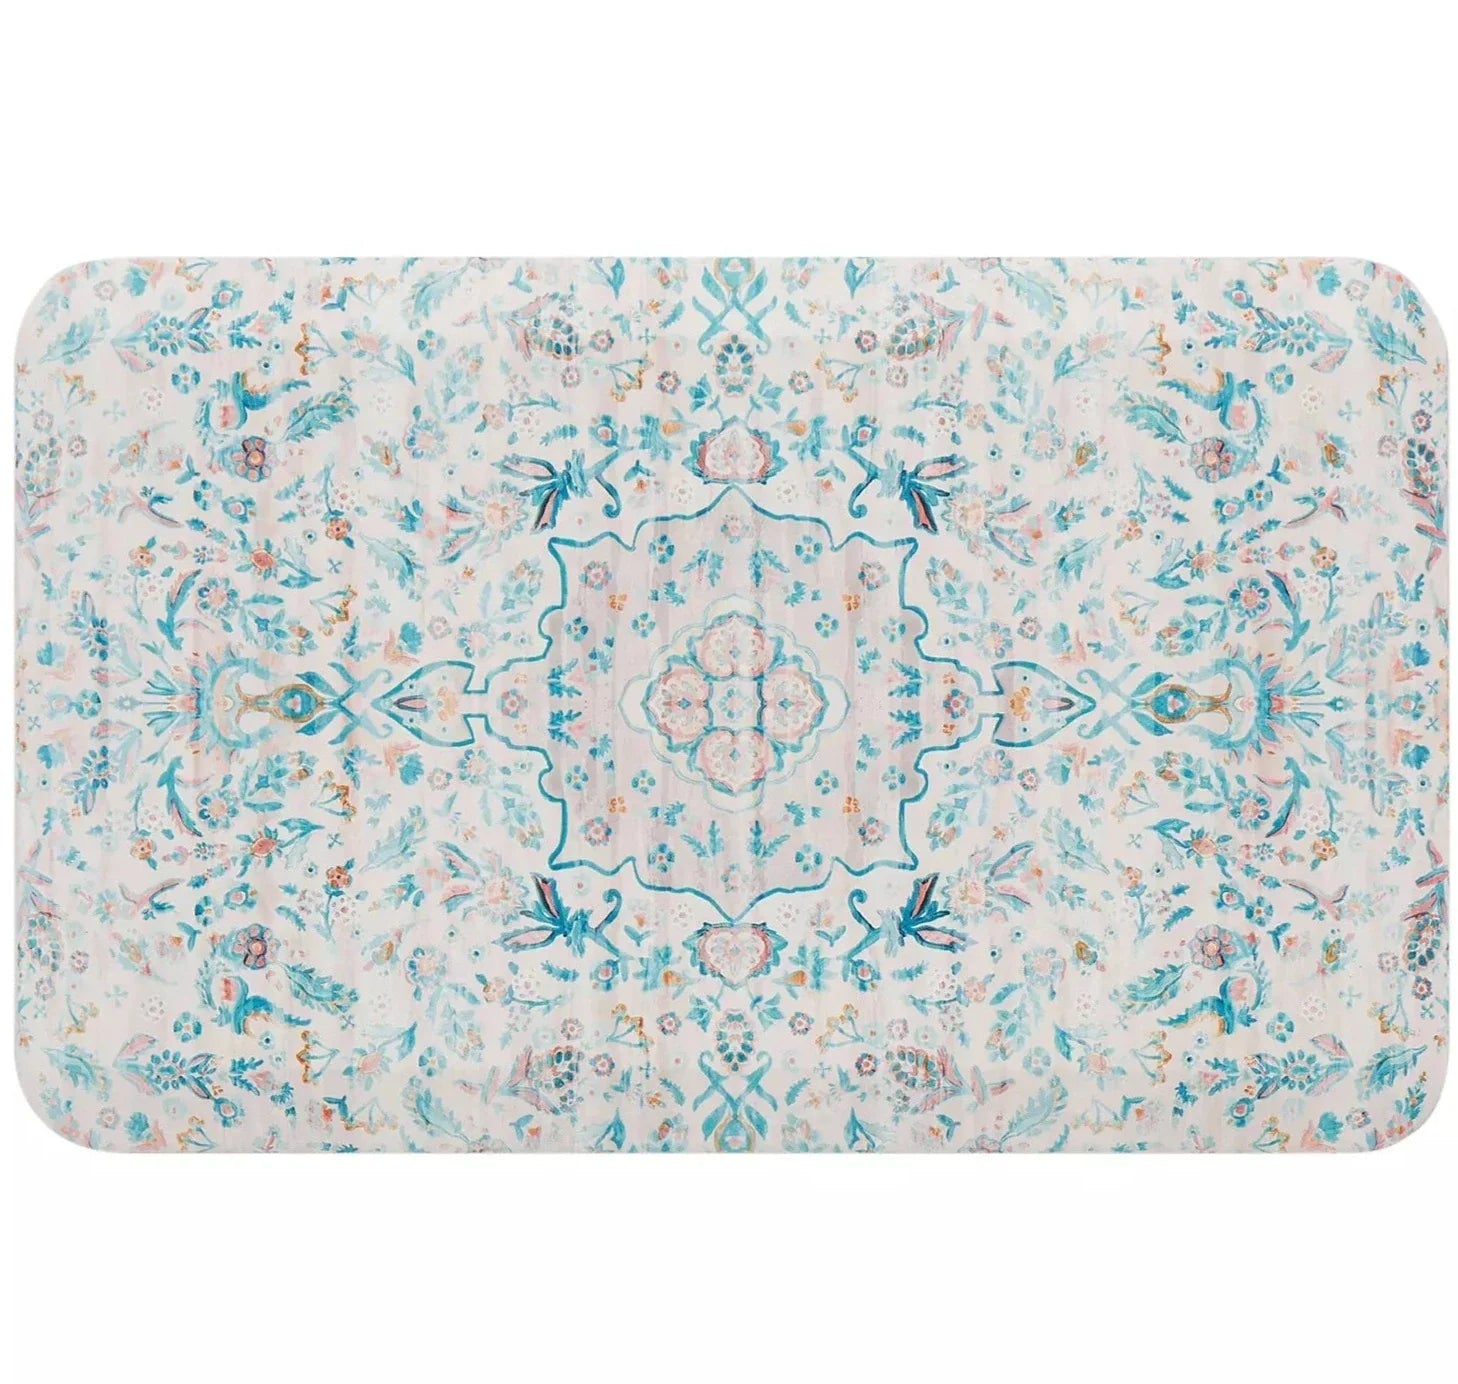 Emile Pale Aqua Muted Blue Pink Floral Boho Standing Mat shown in size 20x32